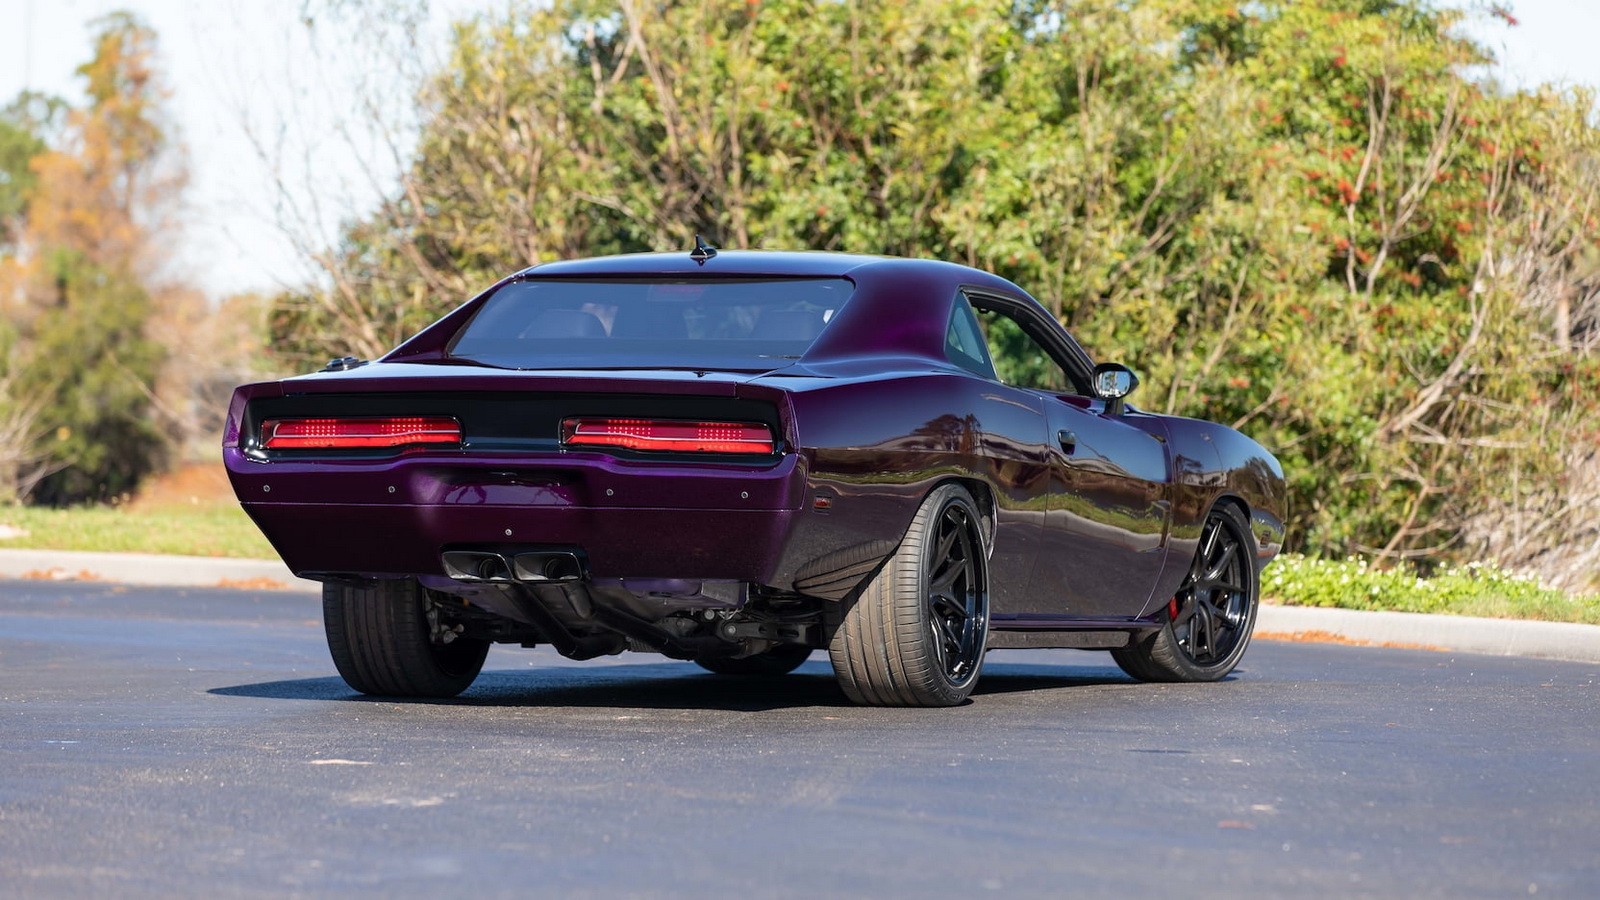 2019 Dodge Challenger Hellcat Wears Carbon 1969 Charger Body Like A Glove |  Carscoops